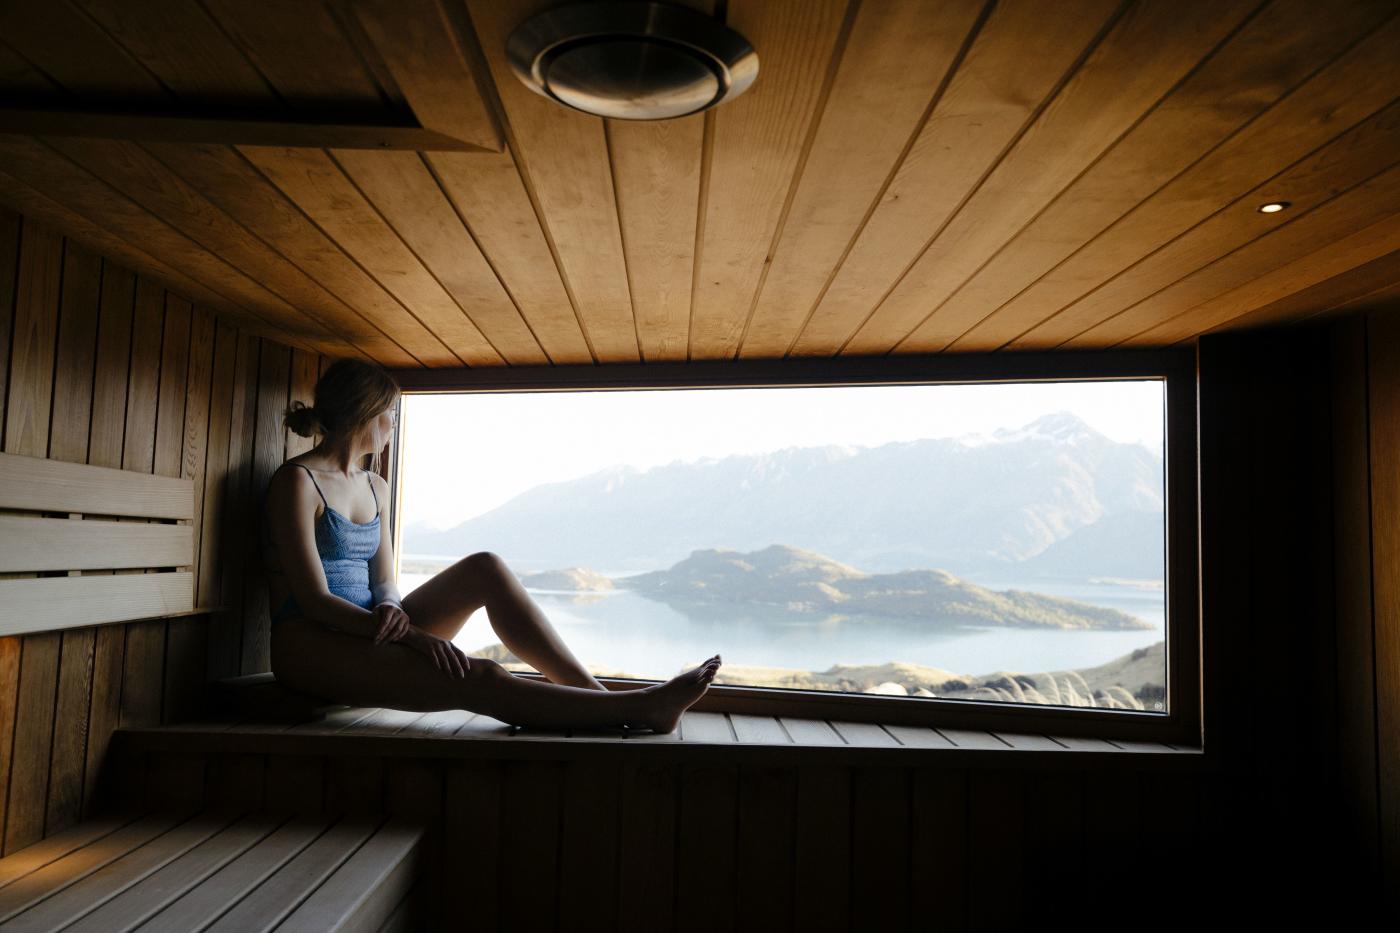 Person sitting in sauna with views of lake and mountains